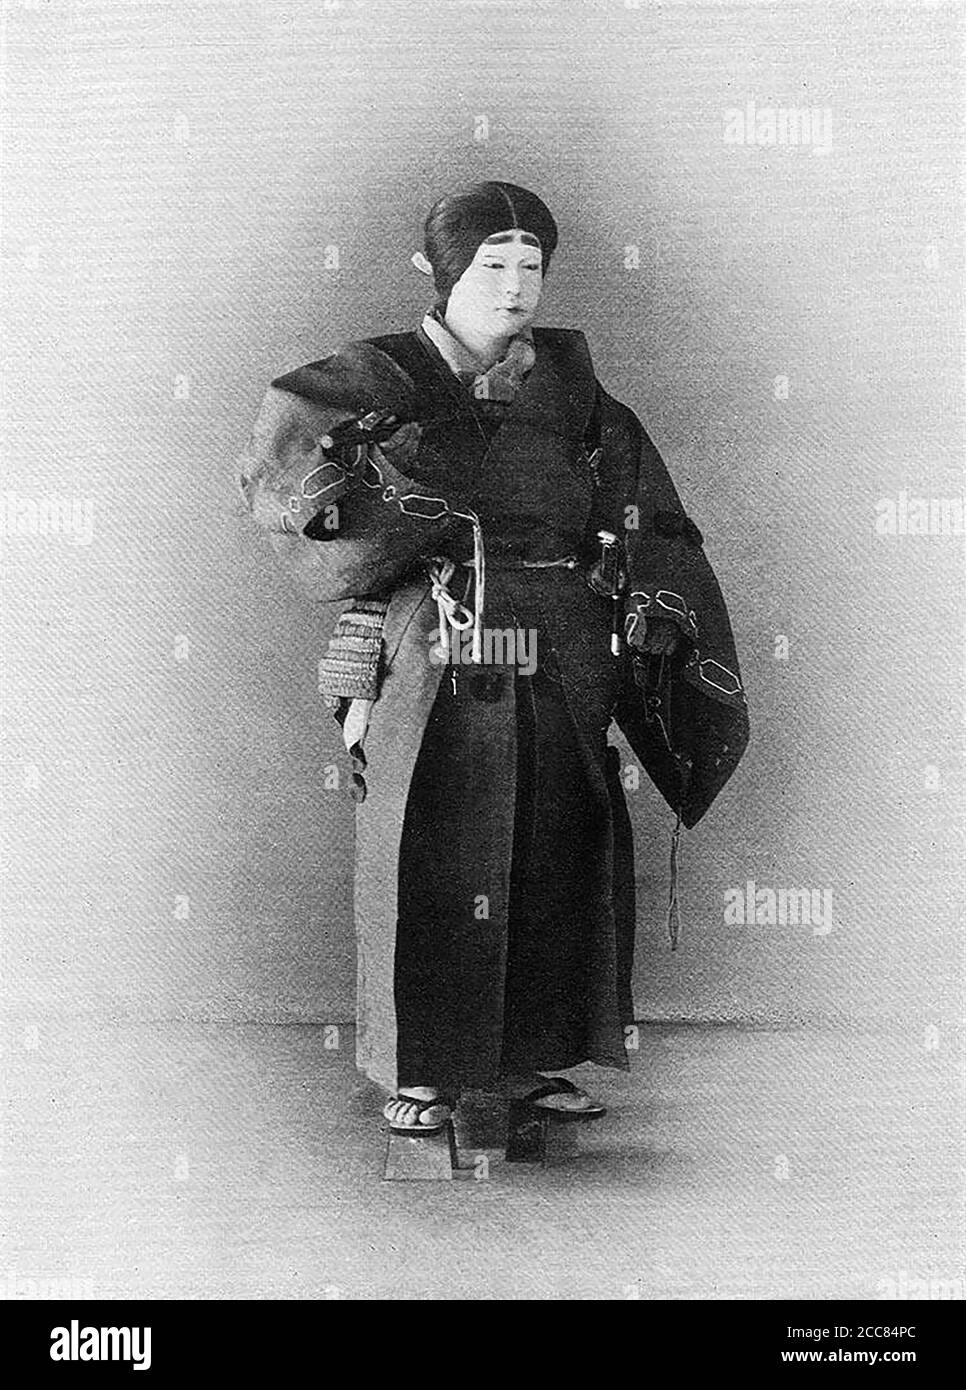 Japan: 'A Youthful Noble'. Chemigraph from series 'Military Costumes in Old Japan' by Kazumasa Ogawa (1860-1929), 1893, Tokyo. Ogawa Kazumasa, also known as Ogawa Kazuma or Ogawa Isshin, was a Japanese photographer, chemigrapher, printer and publisher of the Meiji era. He was a pioneer in photomechanical printing and photography, and was born into the Matsudaira samurai clan, where he studied English and photography at the age of 15. Stock Photo